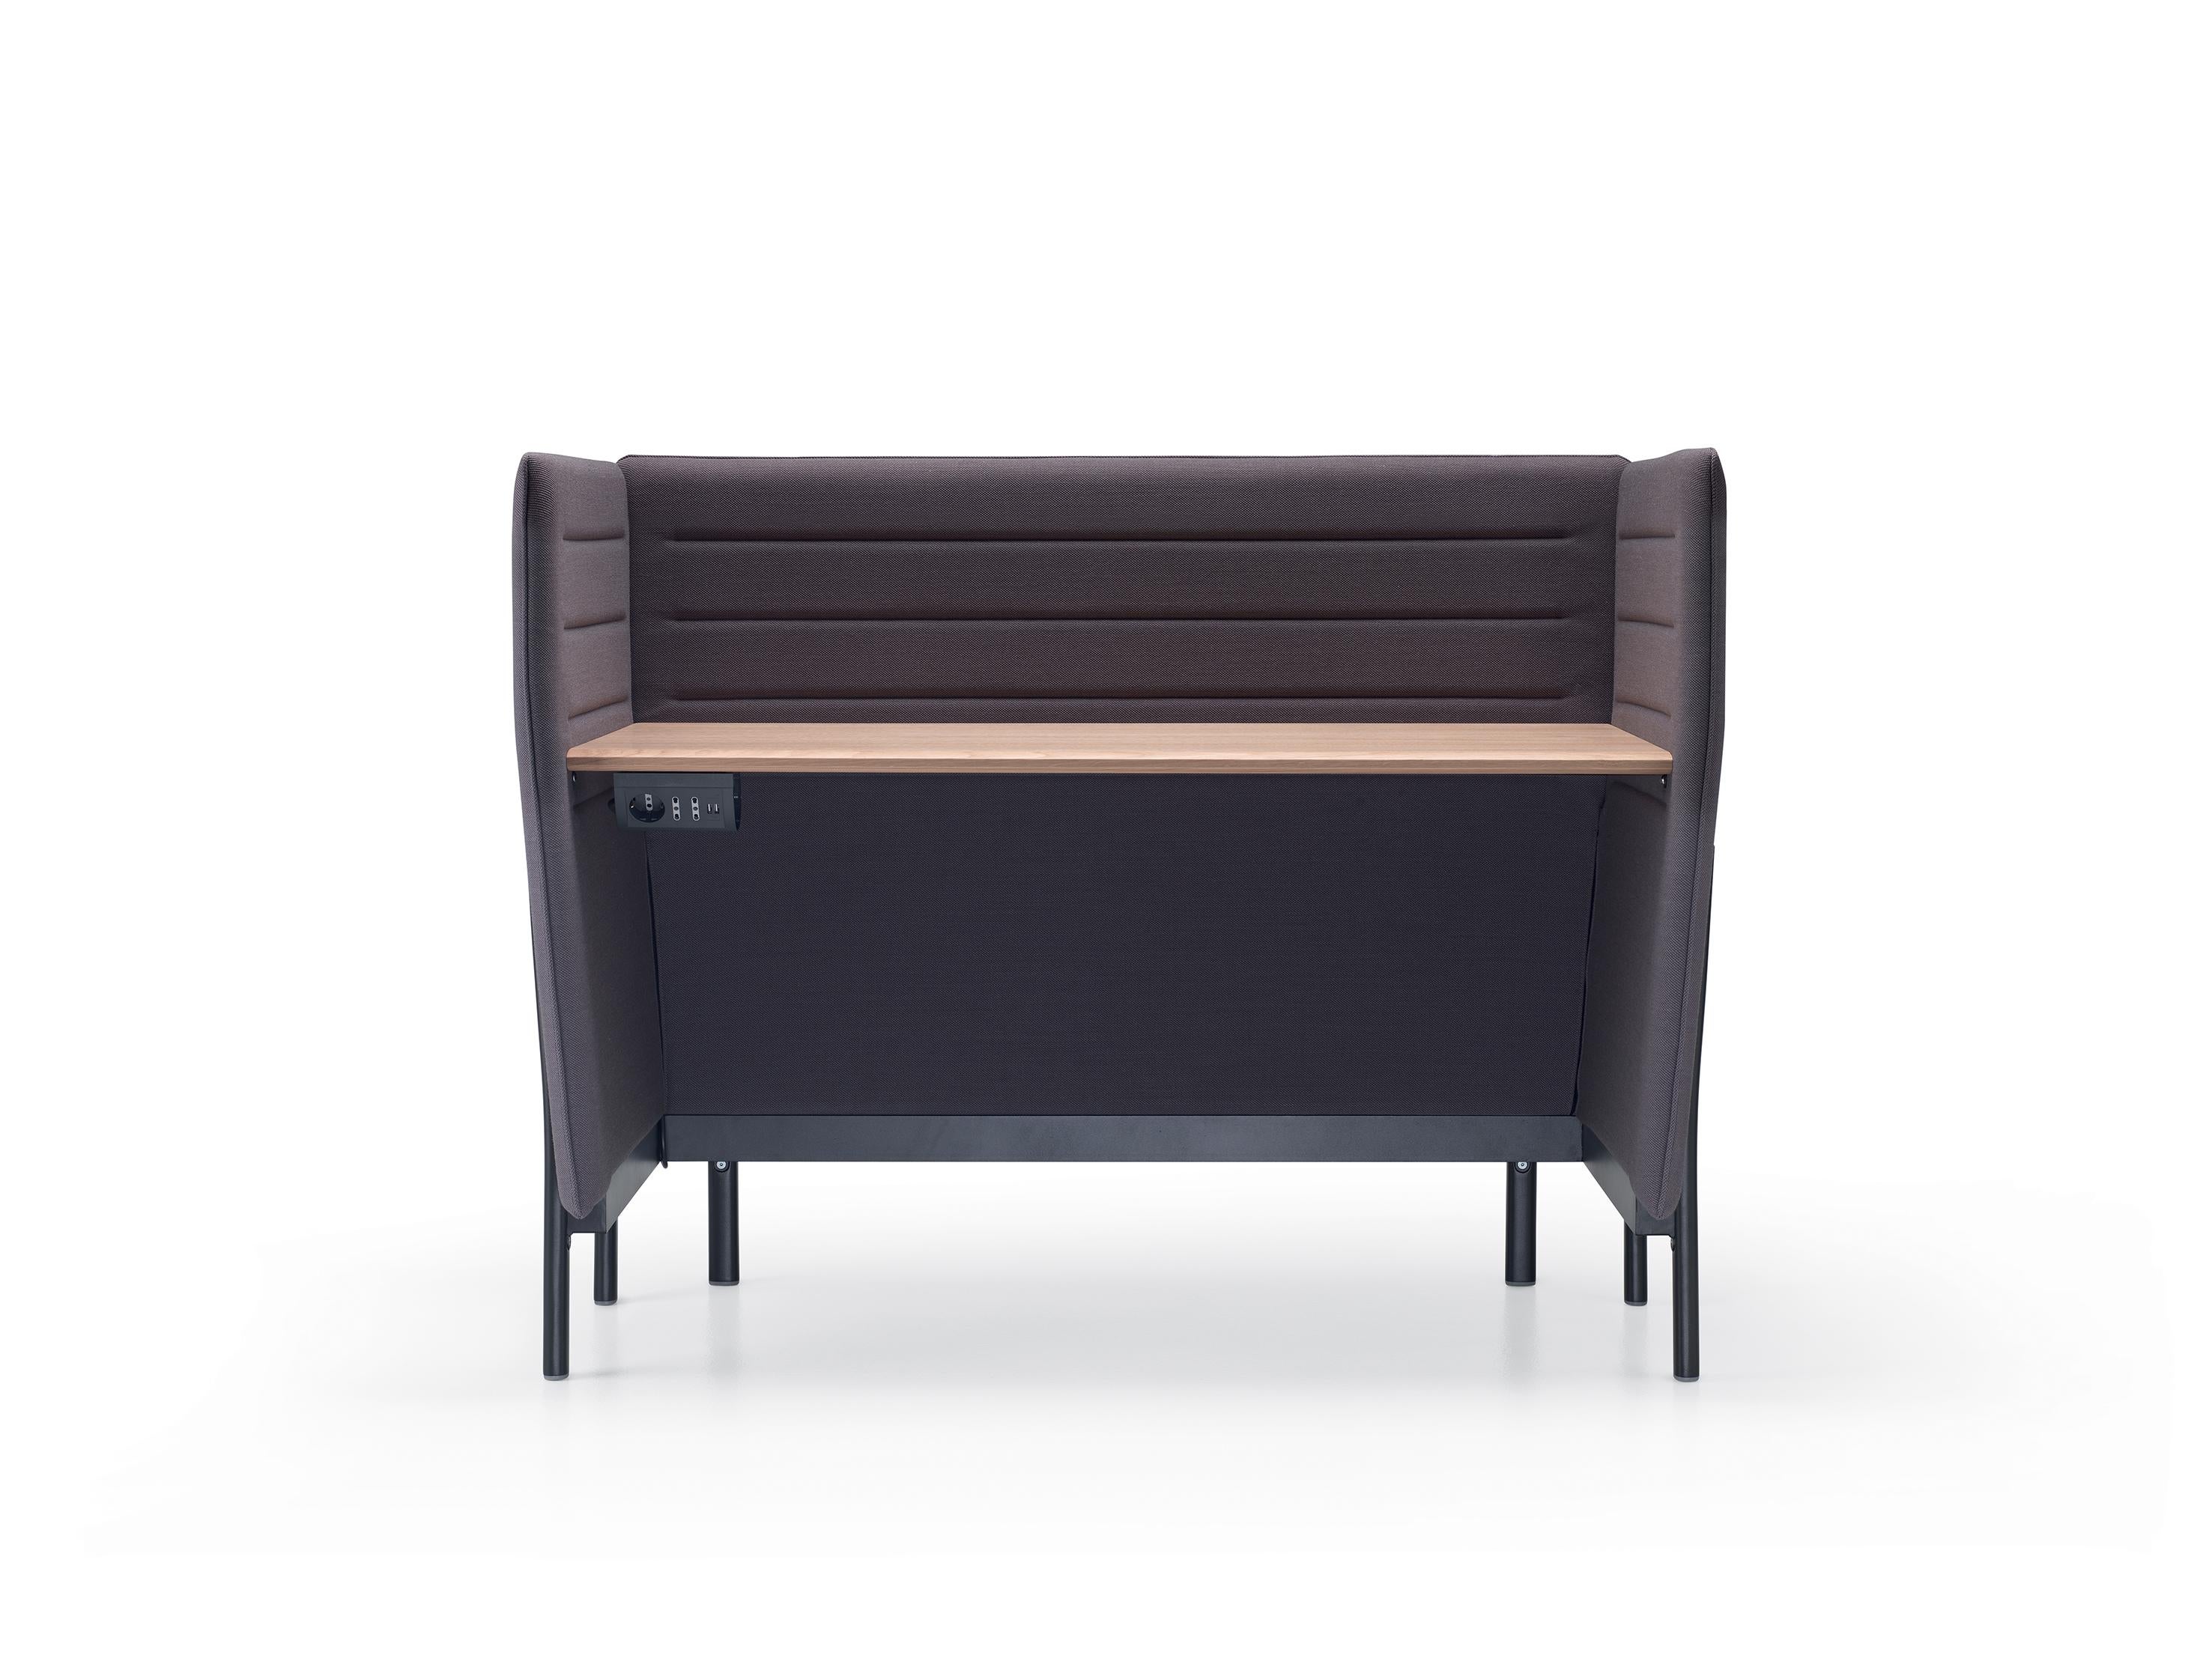 Alias 885 Small Eleven High Desk in Natural Oak & Black Lacquered Aluminum Frame by PearsonLloyd

Desk. Structure with legs in die-cast aluminium and frame in steel lacquered or polished.Panels covered with fabric. Fixed top in MDF oak veneered